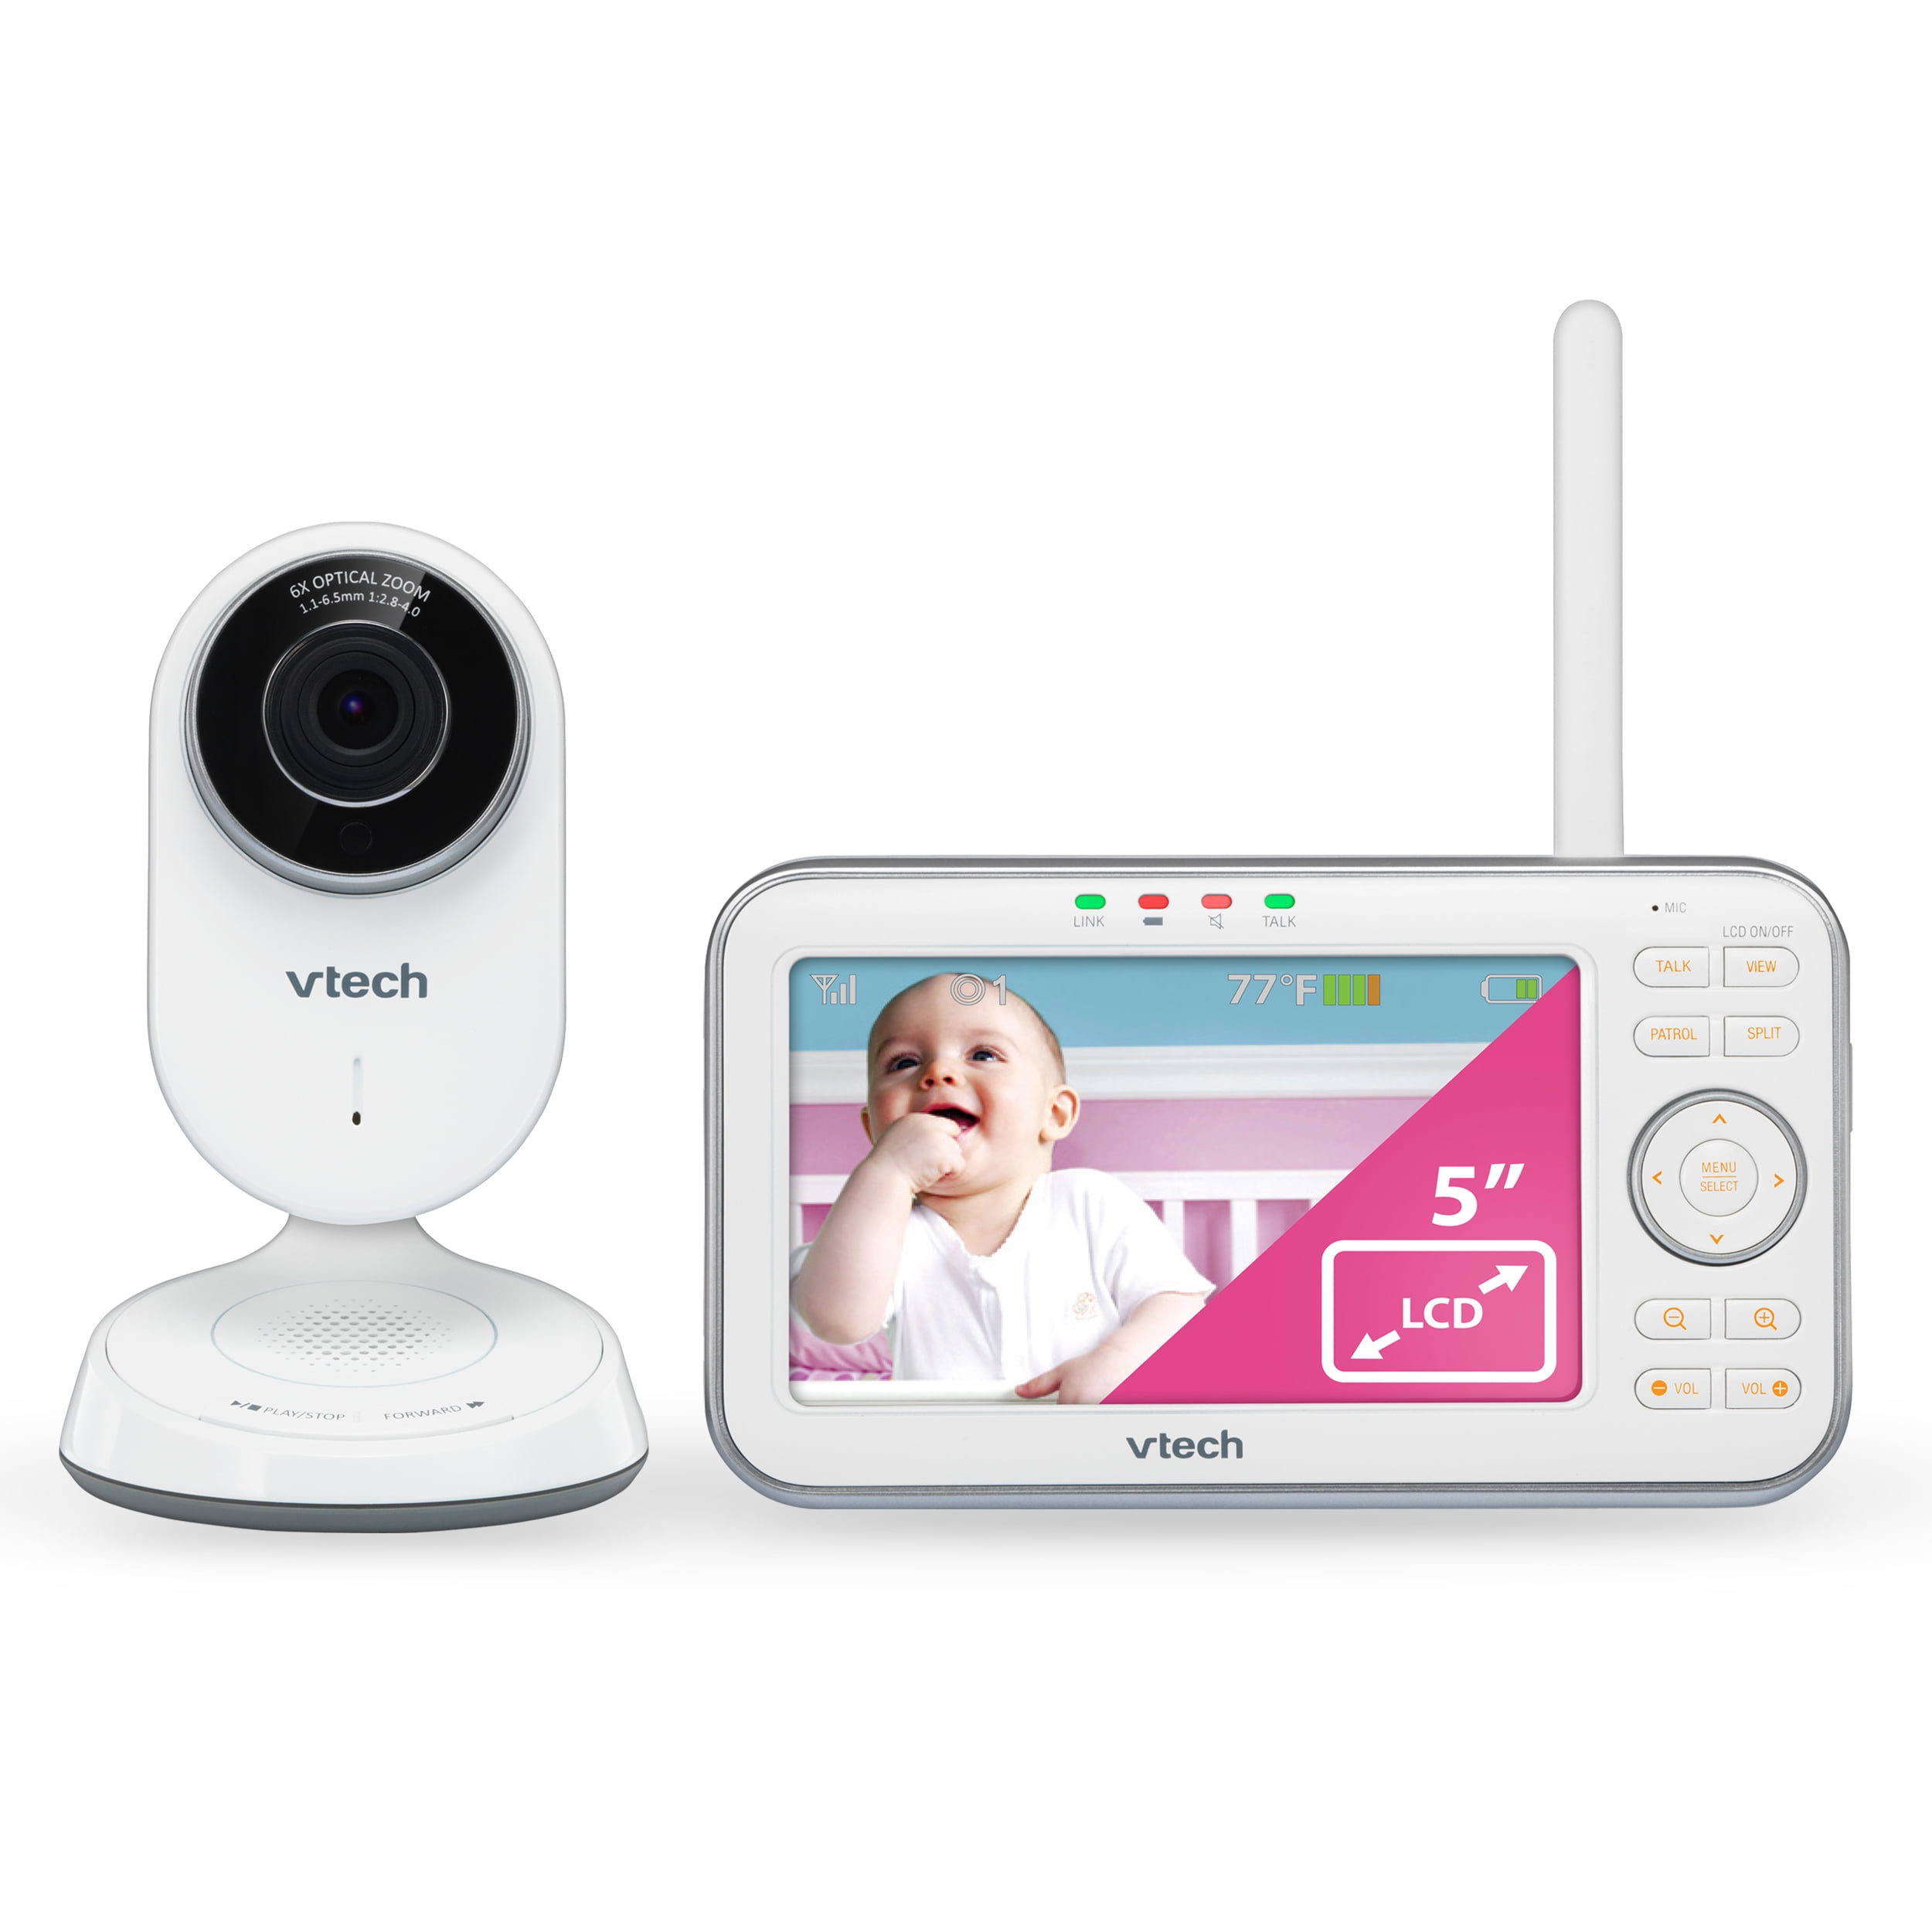 VTech VM5271 Video Baby Monitor with 5 